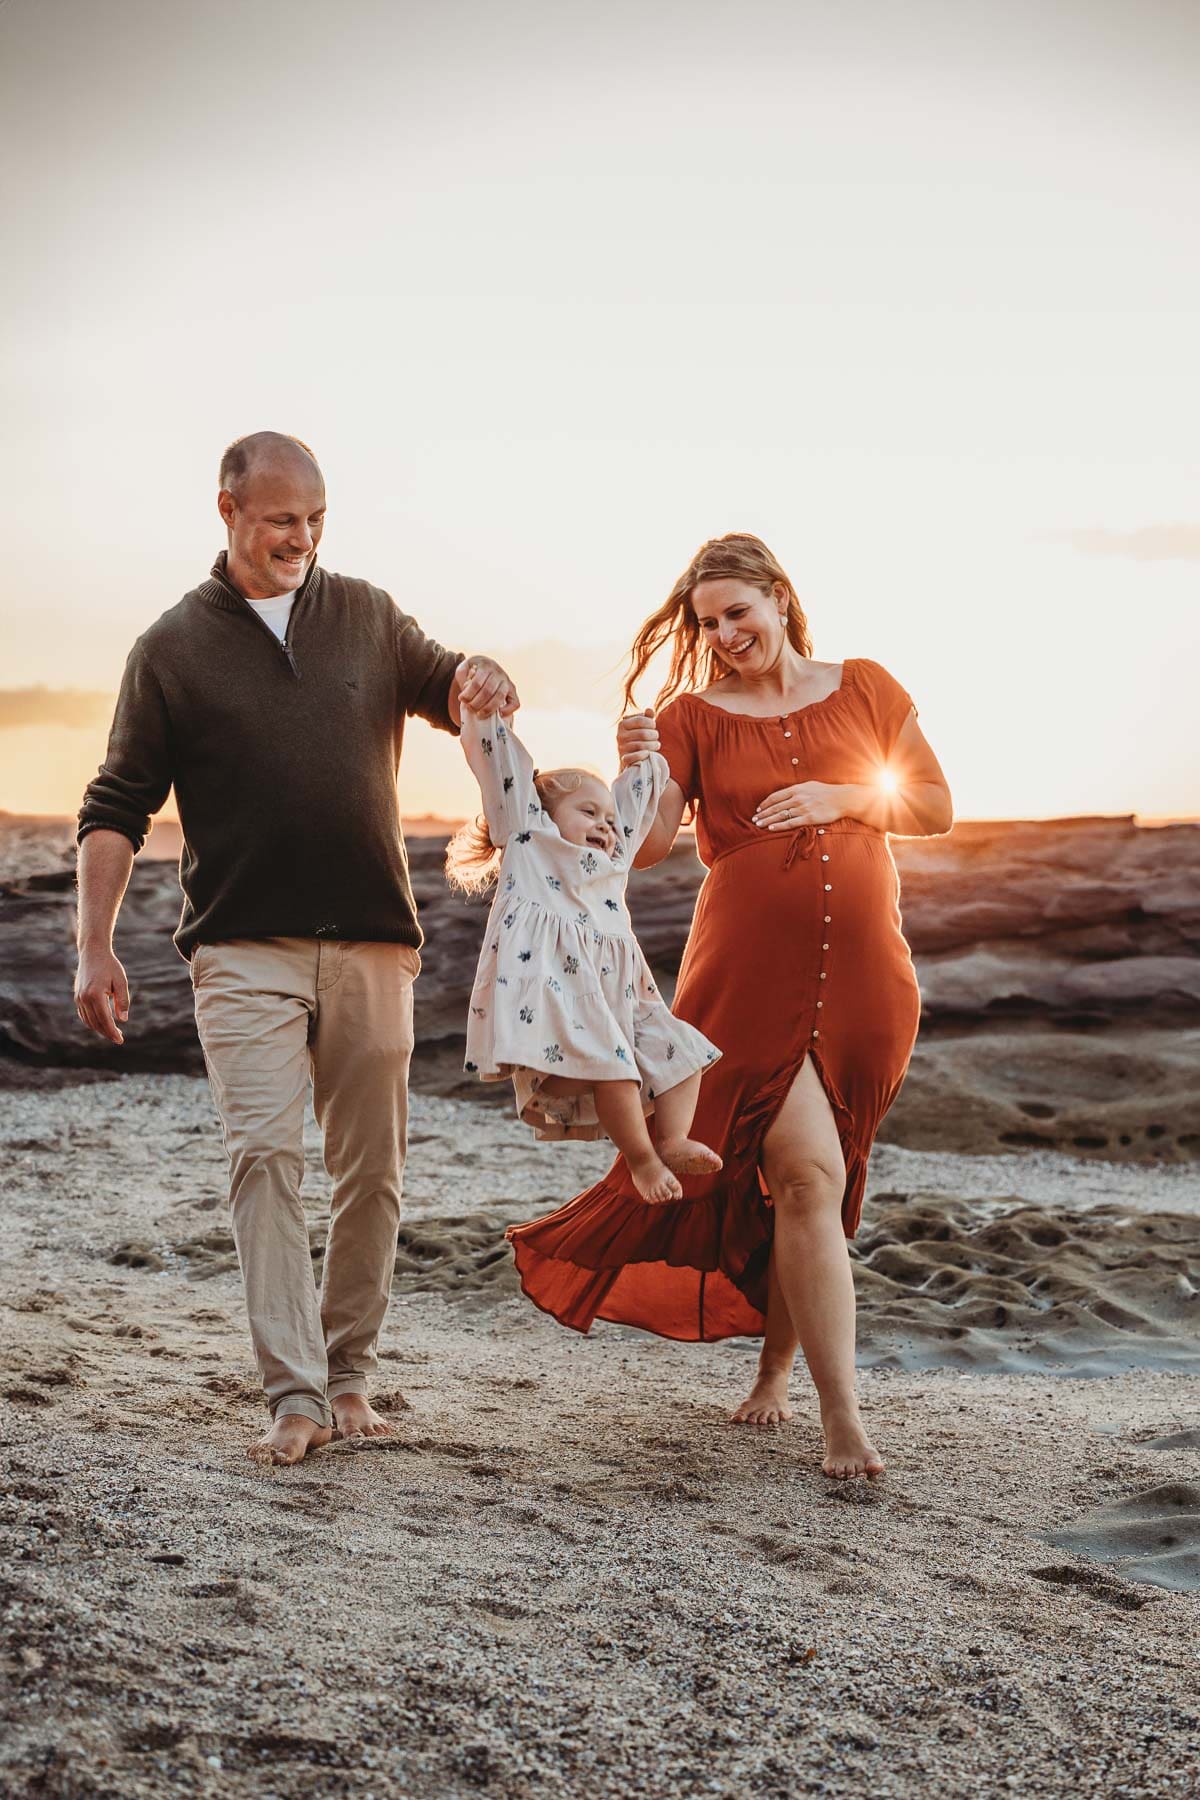 A family walk along the beach at sunset with their baby girl between them